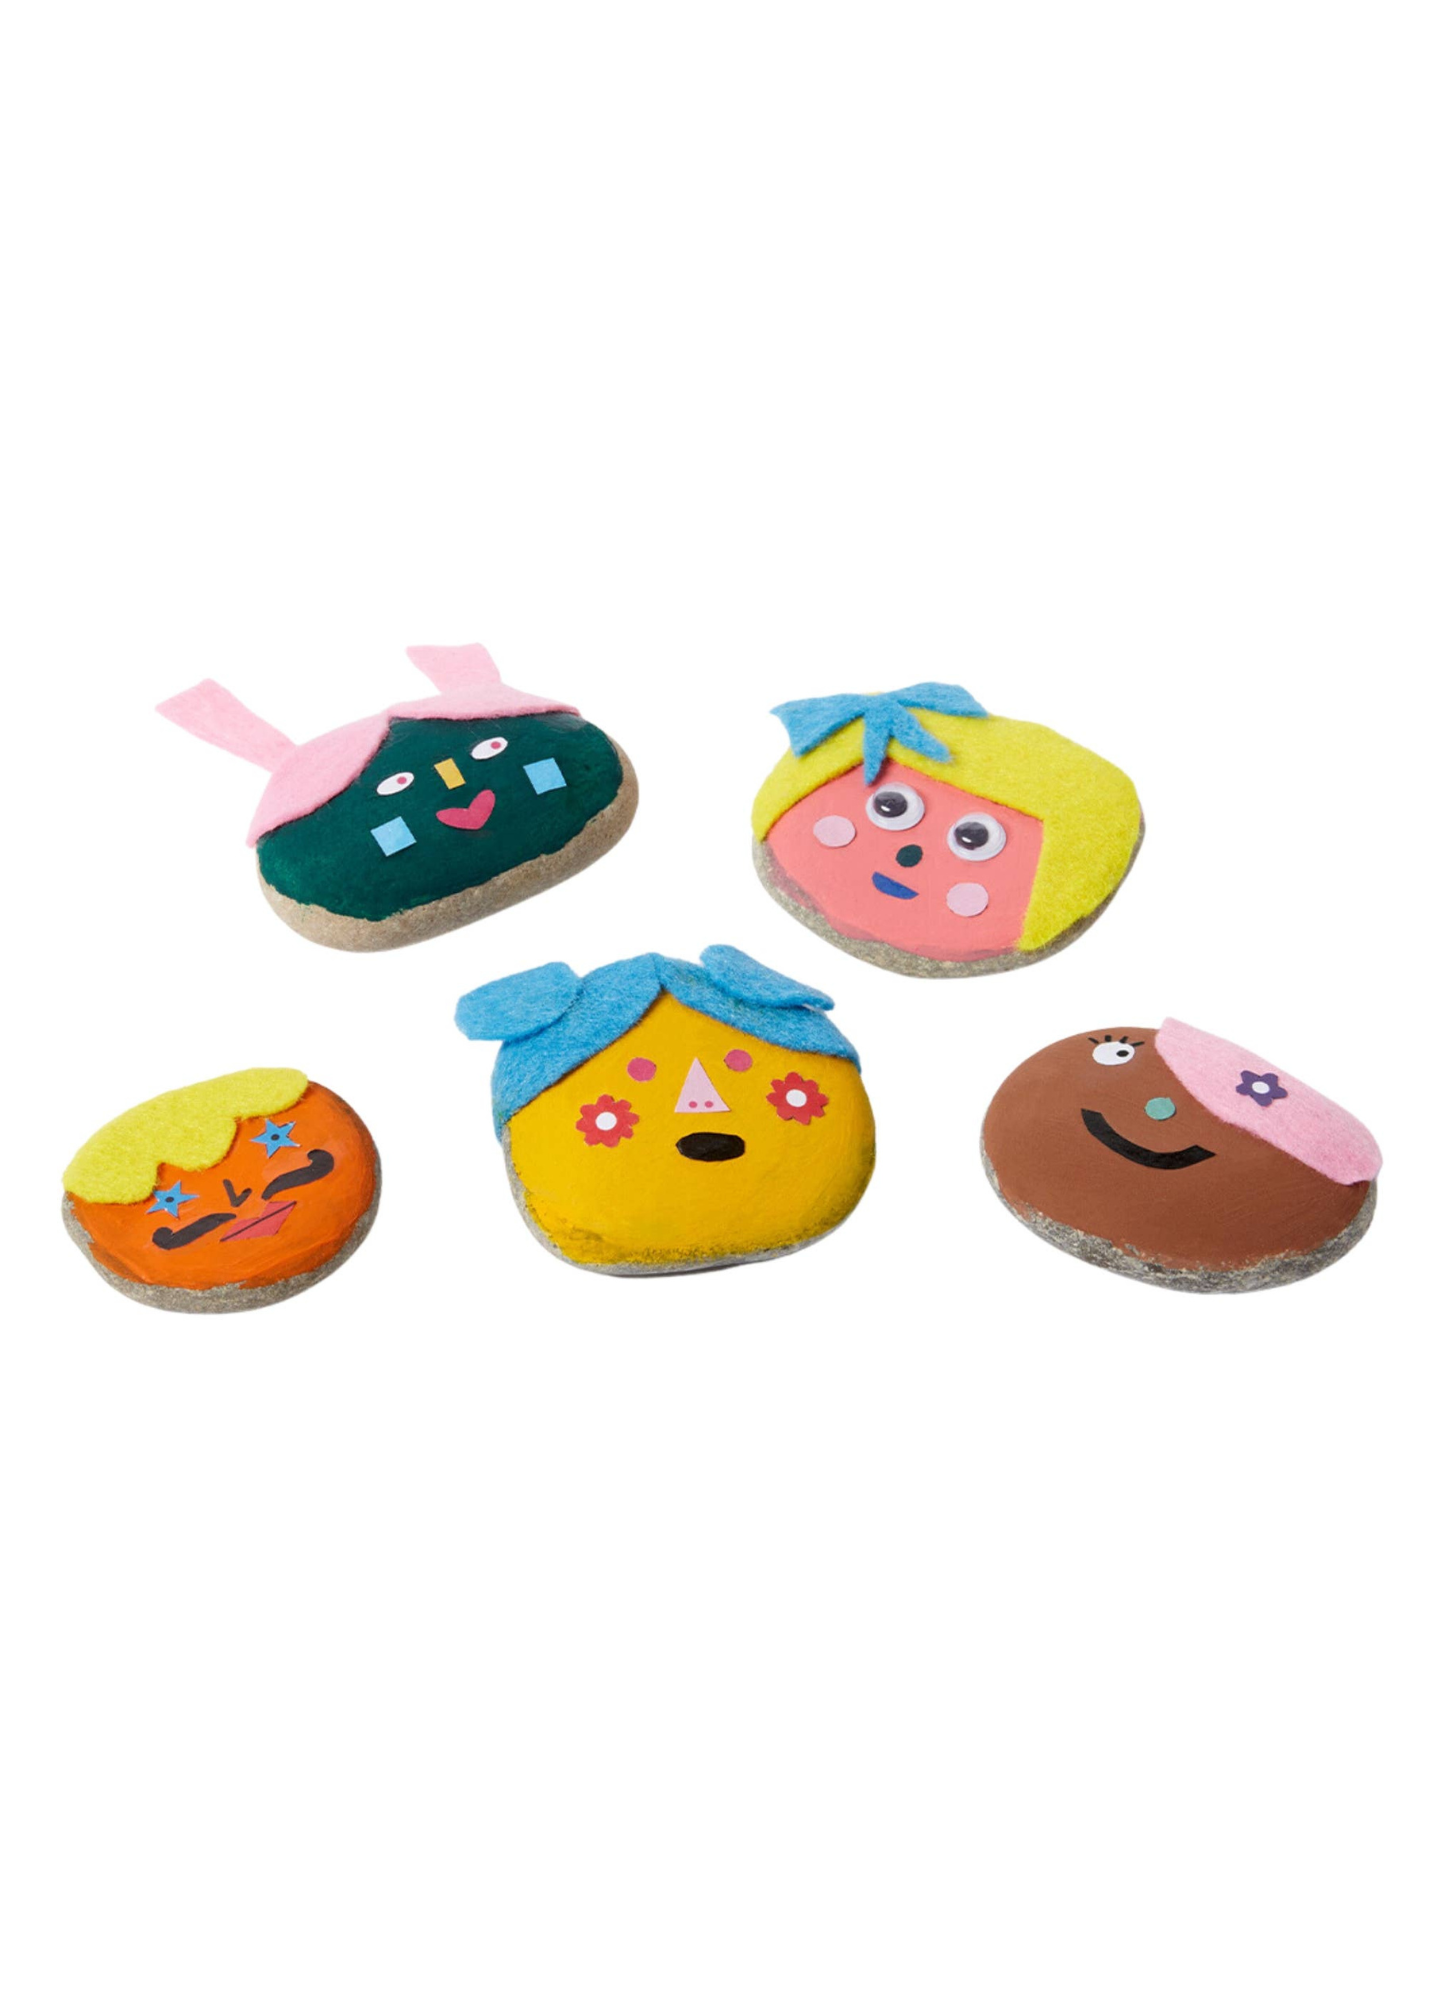 COOL FACES ROCK PAINTING KIT